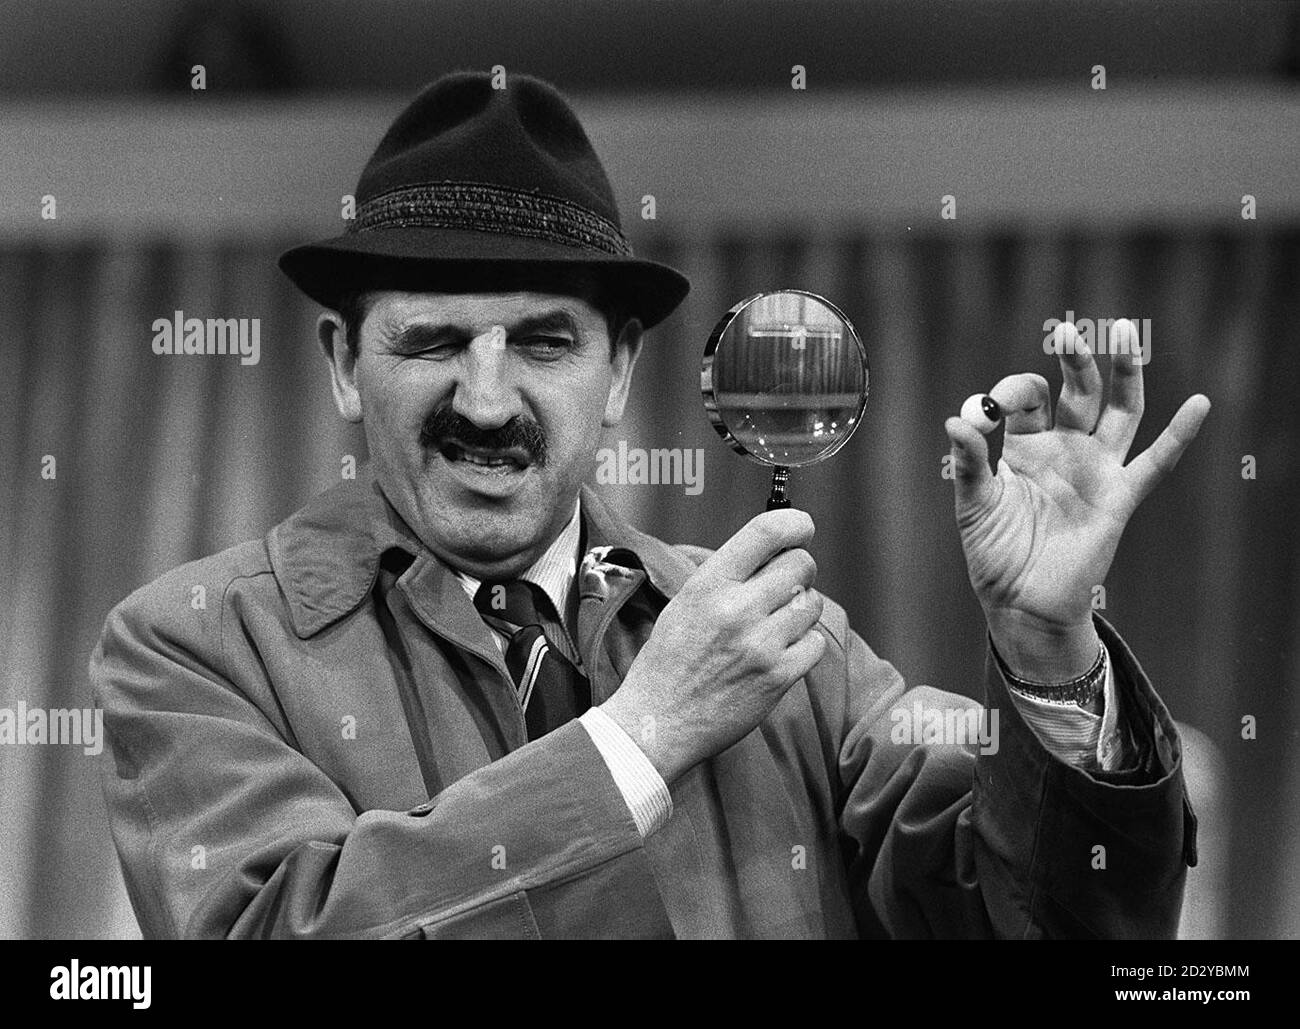 ACTOR LEONARD ROSSITER (d.1984) AT THE AMBASSADOR'S THEATRE, LONDON PREPARING FOR HIS ROLE AS THE ENIGMATIC POLICE INSPECTOR 'TRUSCOTT' IN JOE ORTON'S THEATRE PRODUCTION 'LOOT' Stock Photo